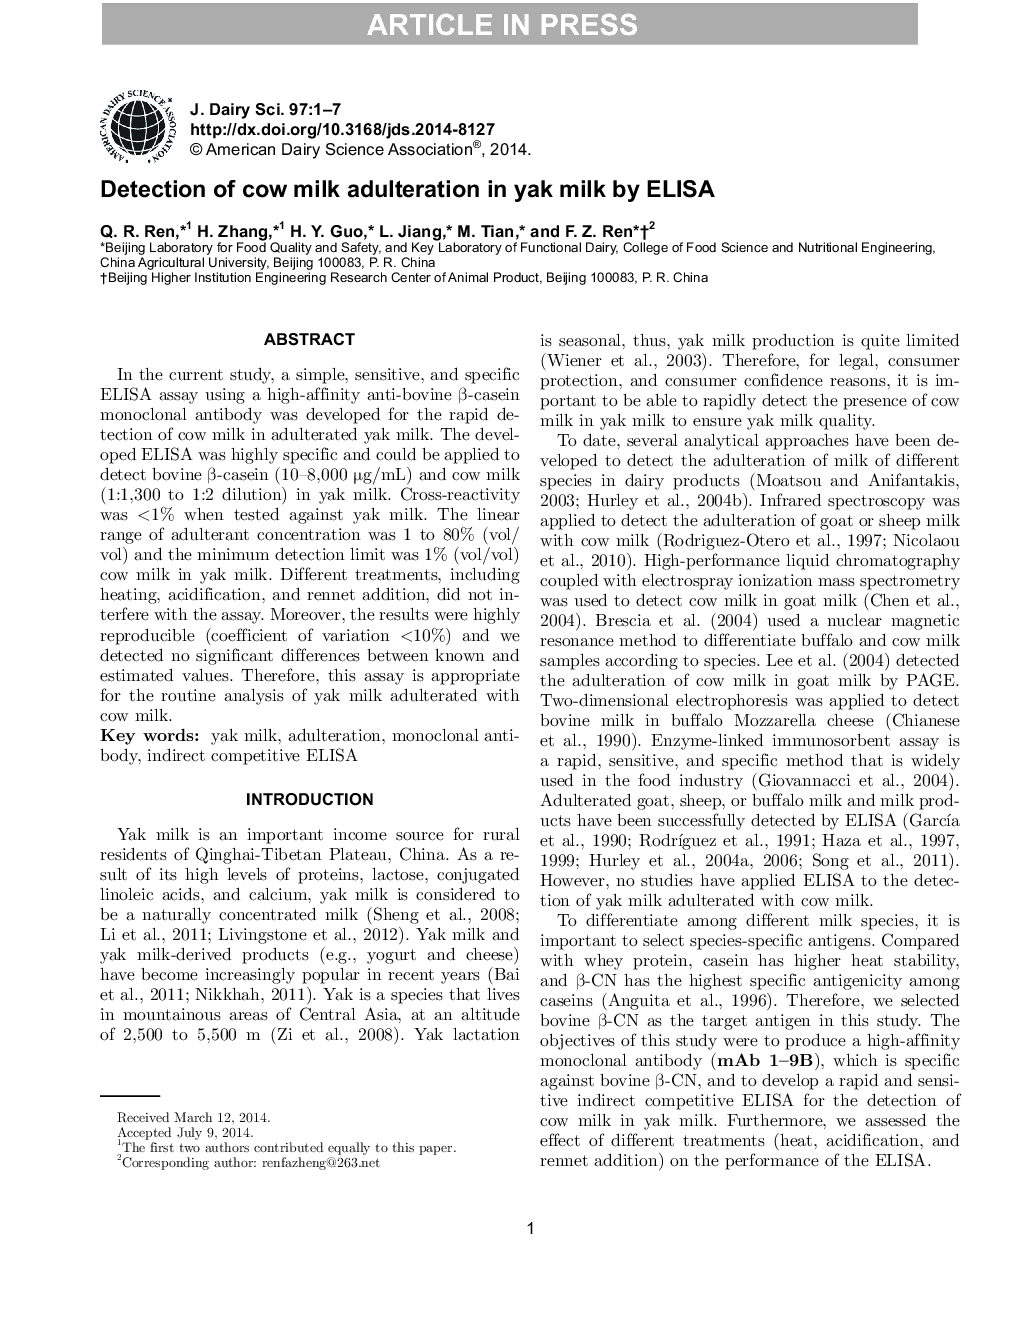 Detection of cow milk adulteration in yak milk by ELISA